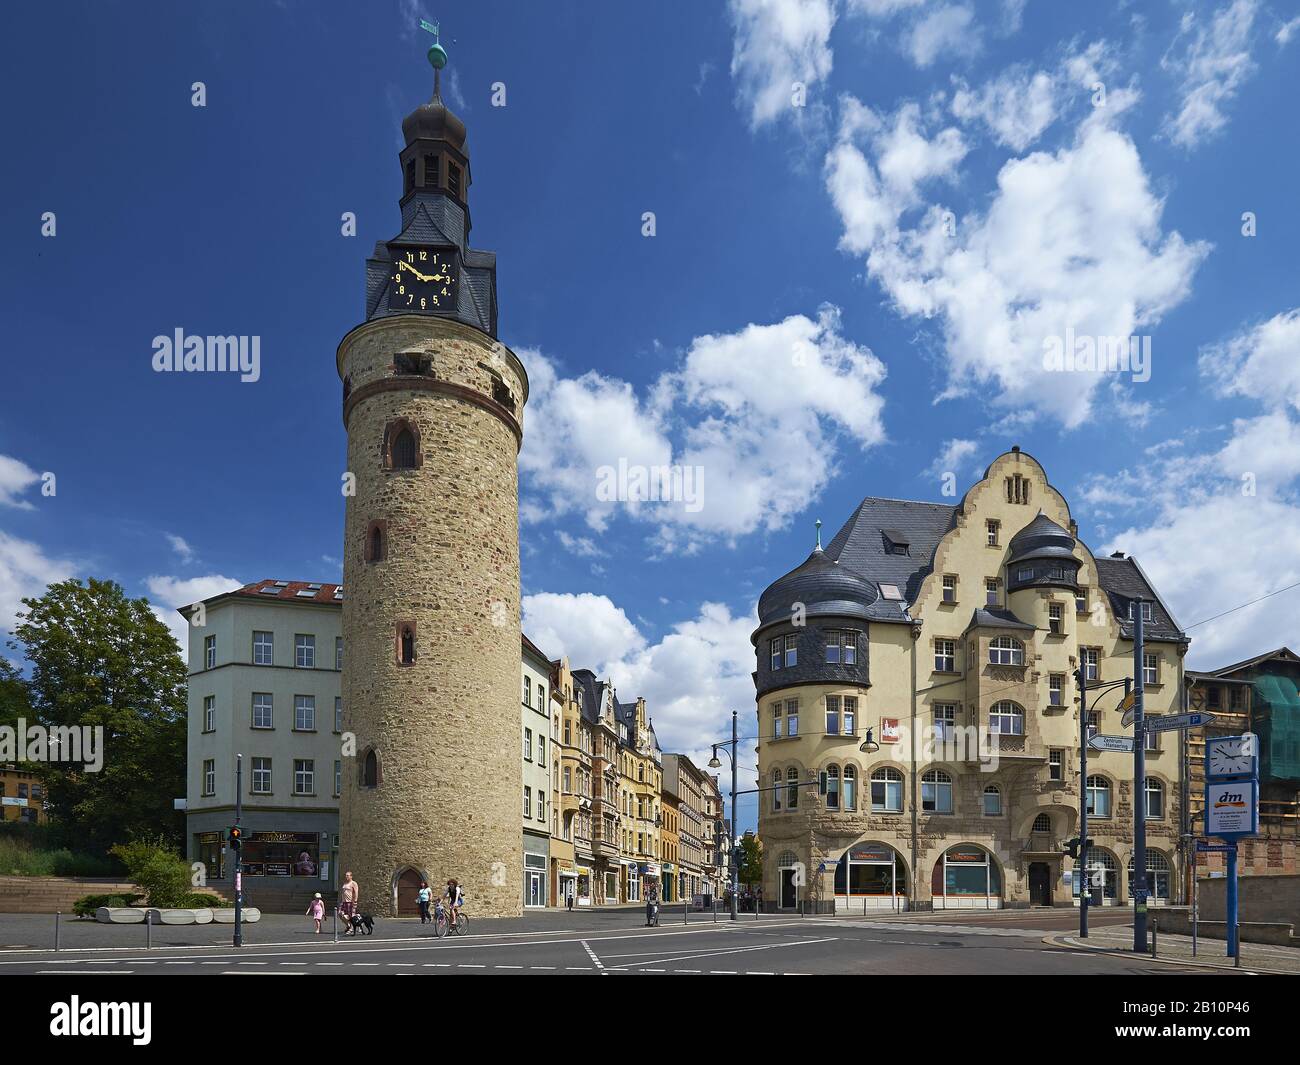 Leipzig tower at Hansering in Halle / Saale, Saxony-Anhalt, Germany Stock Photo